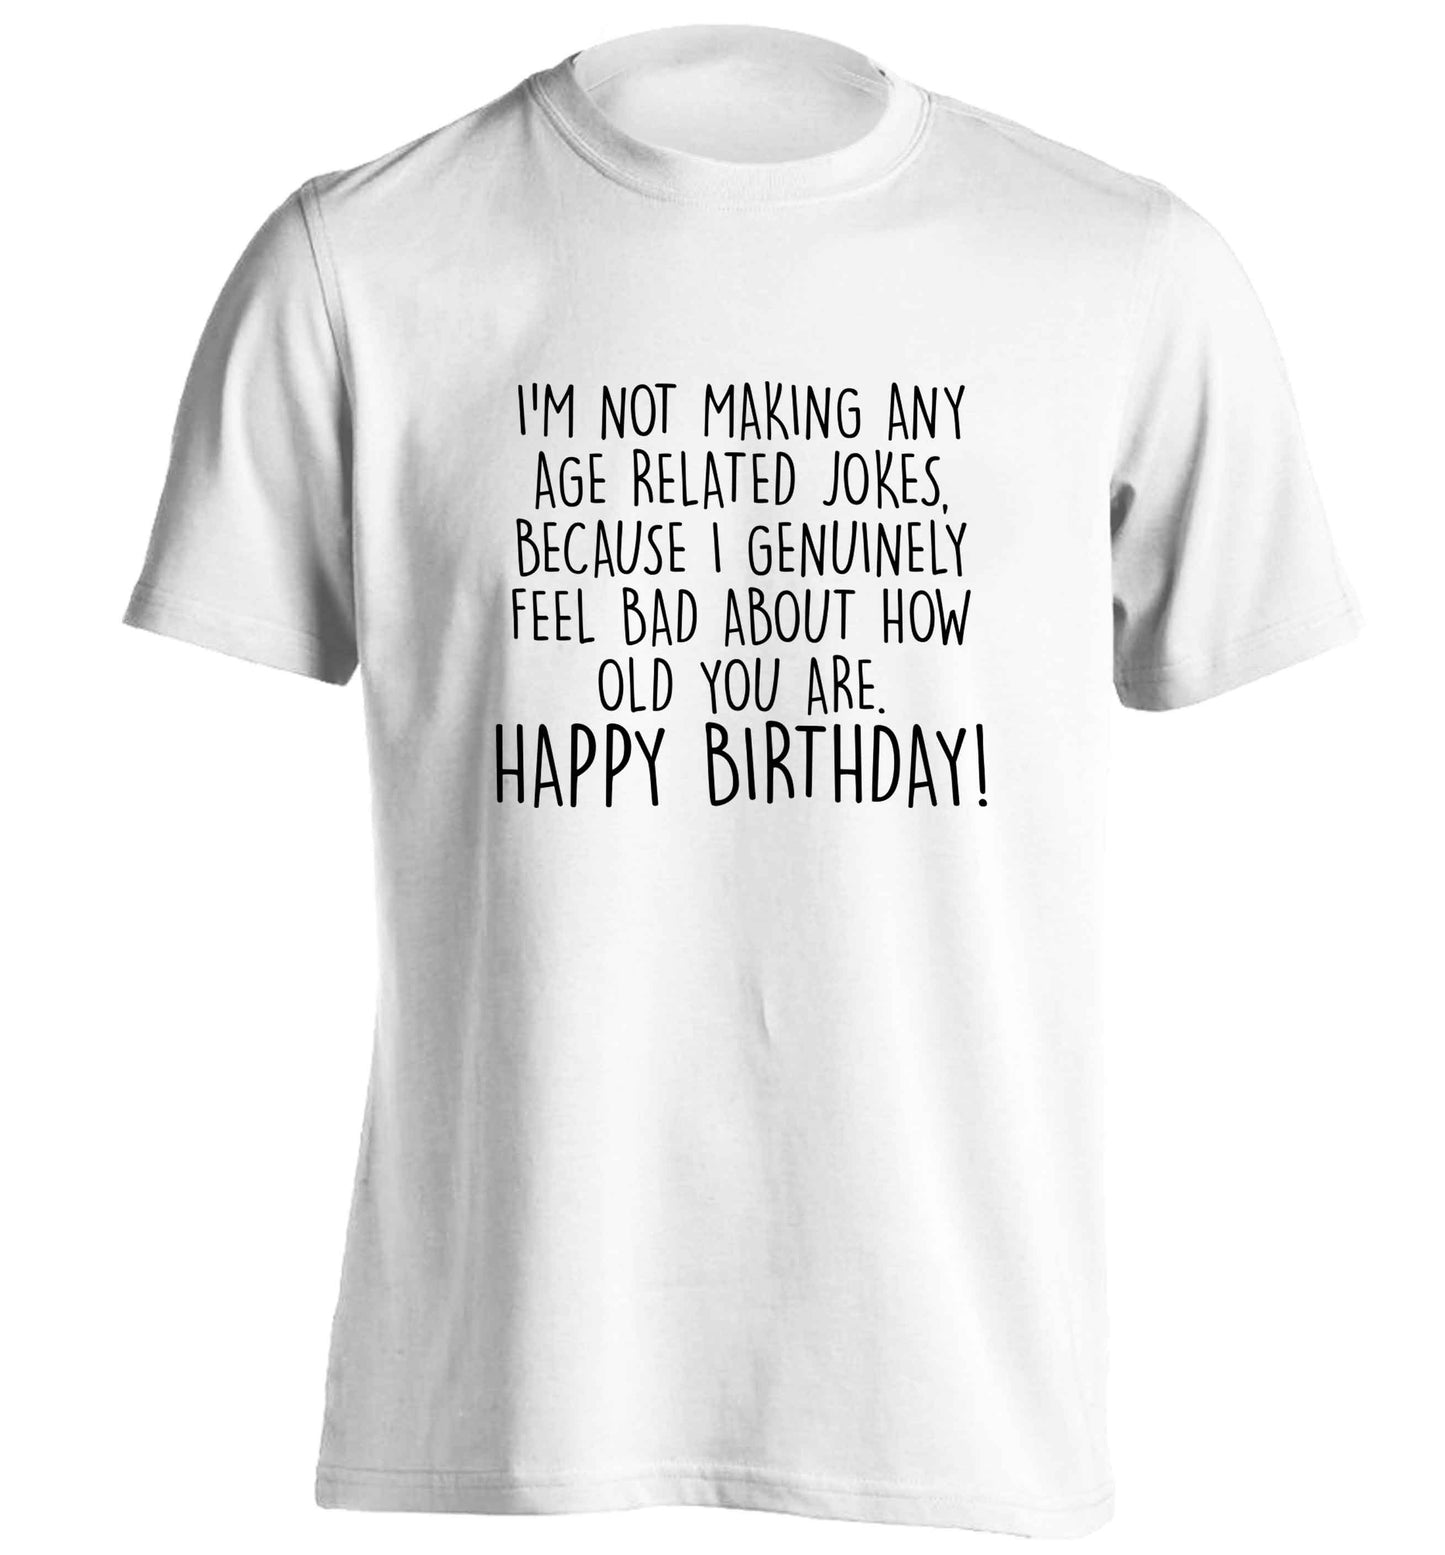 I'm not making any age related jokes because I genuinely feel bad for how old you are adults unisex white Tshirt 2XL